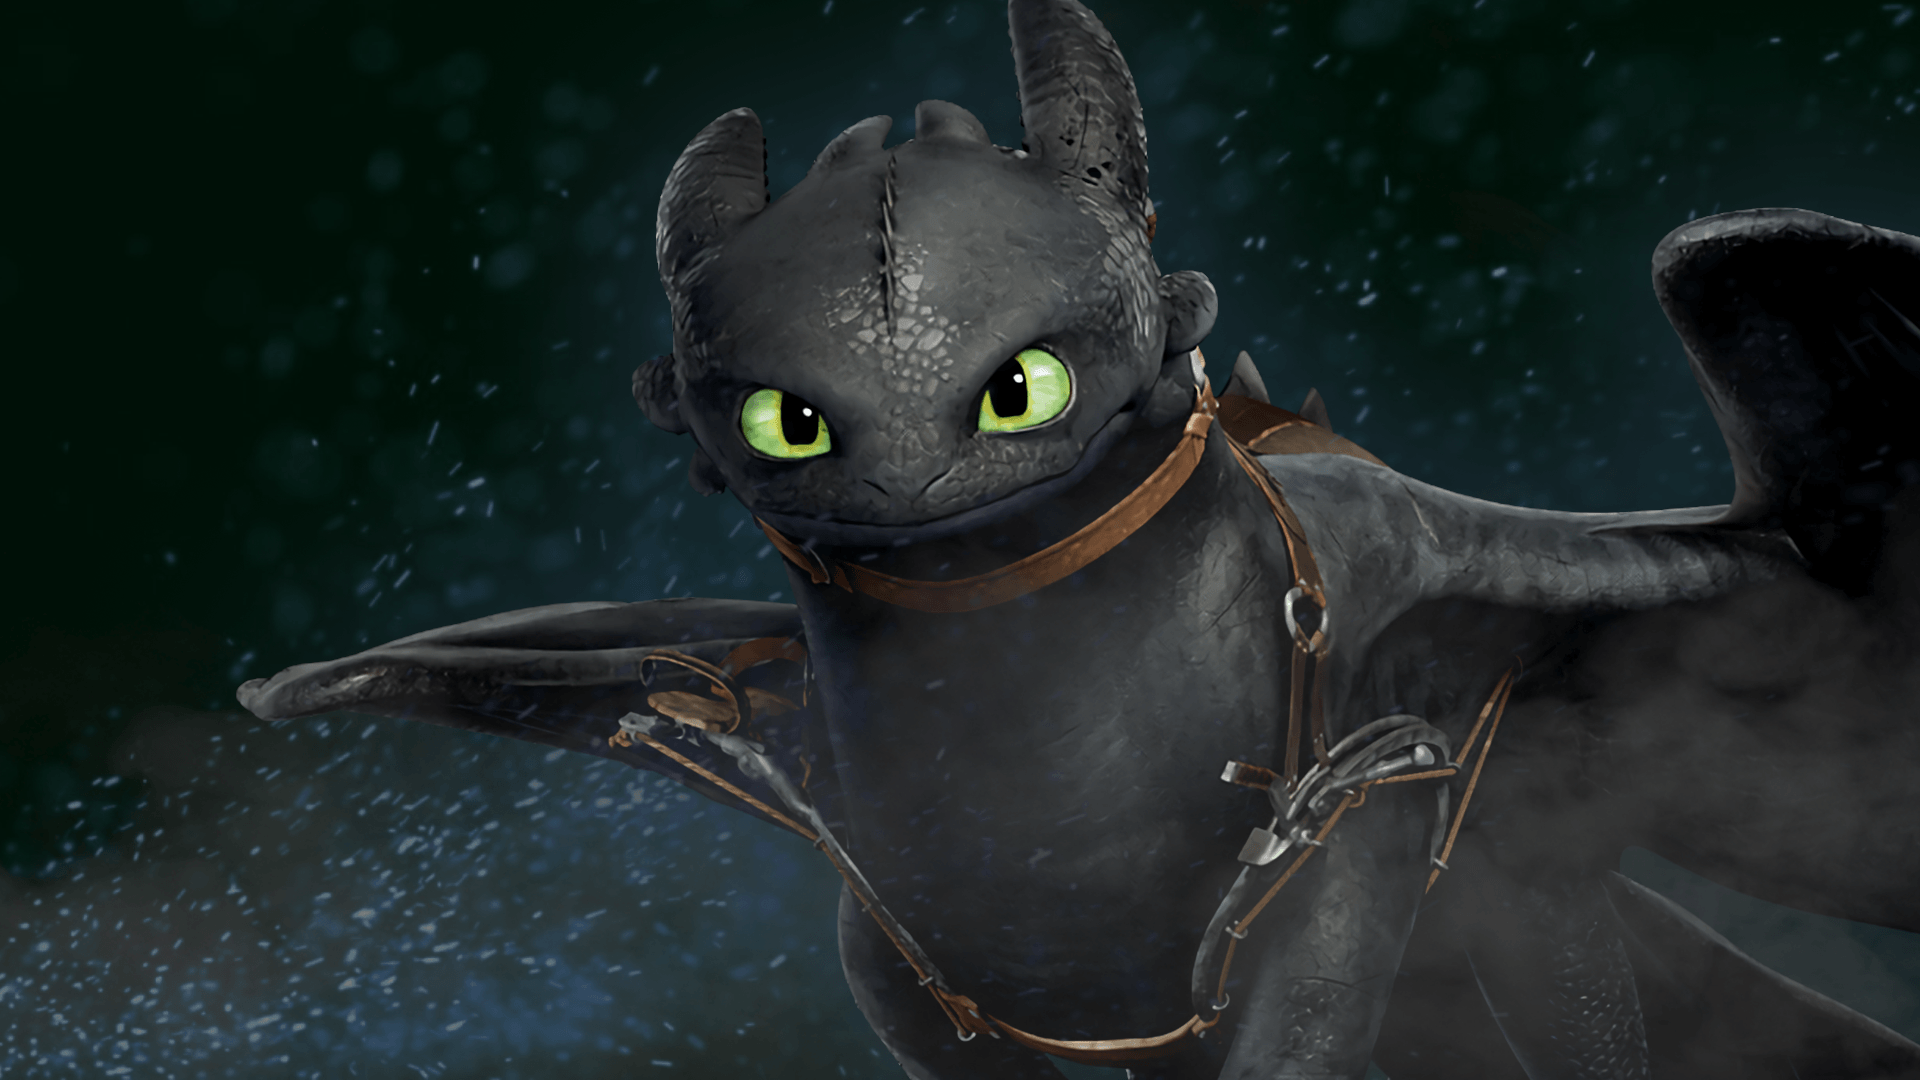 Made a Toothless wallpaper with a friend